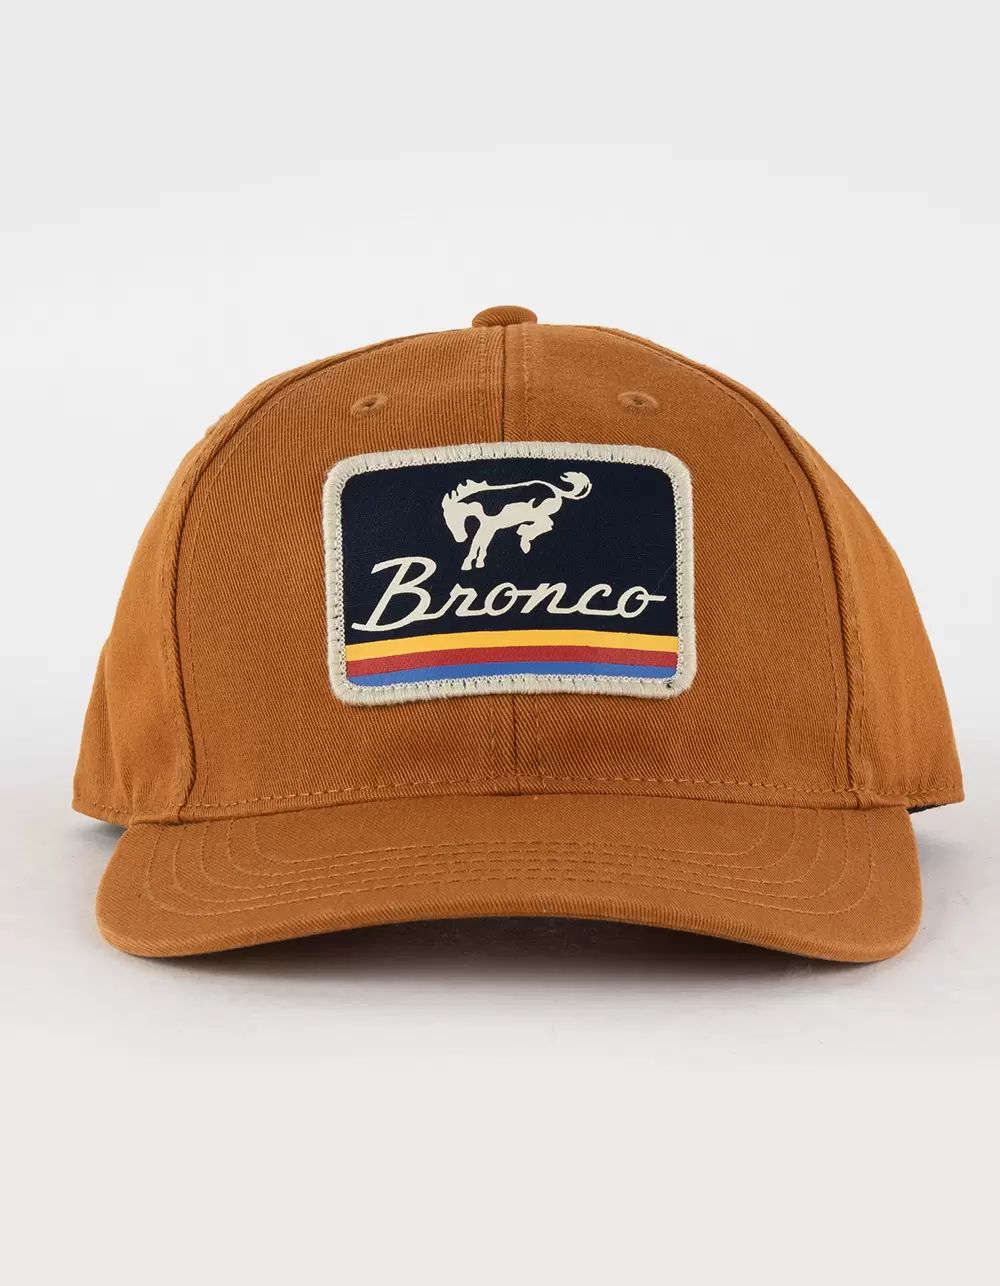 AMERICAN NEEDLE Bronco Patch Womens Strapback Dad Cap | Tillys